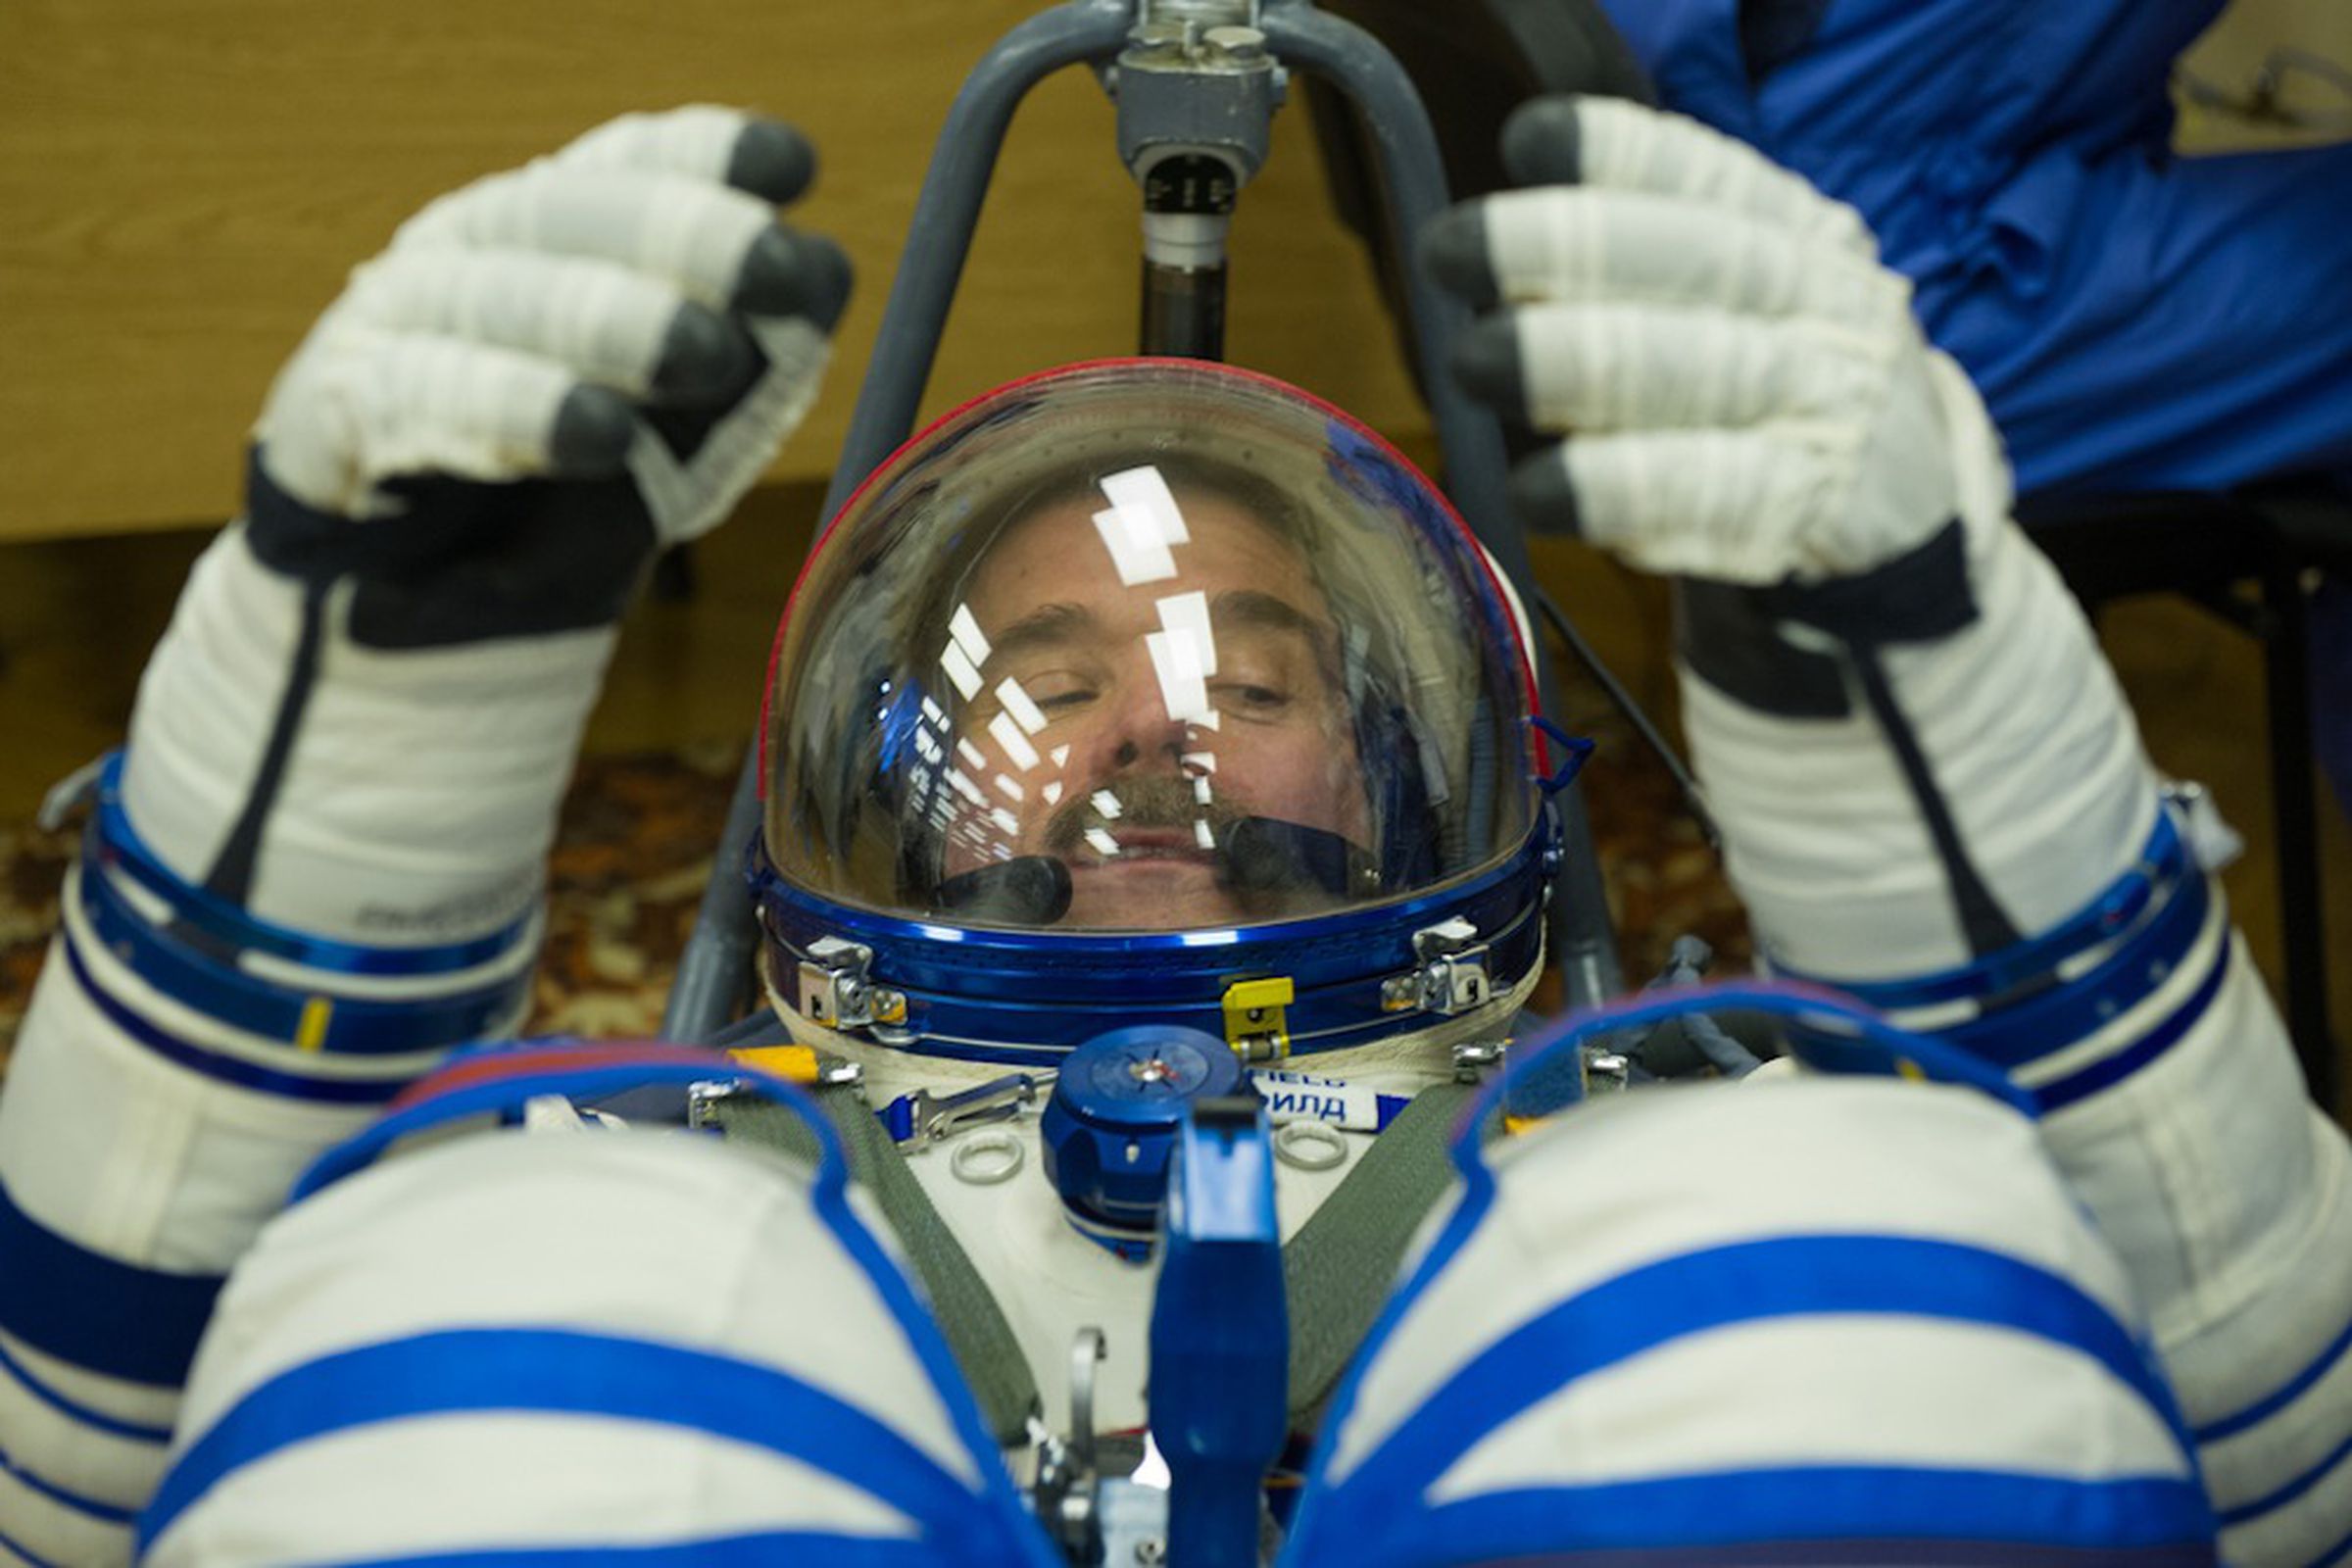 Chris Hadfield in Russian Space Suit (Credit: NASA/GCTC/Andrey Shelepin)